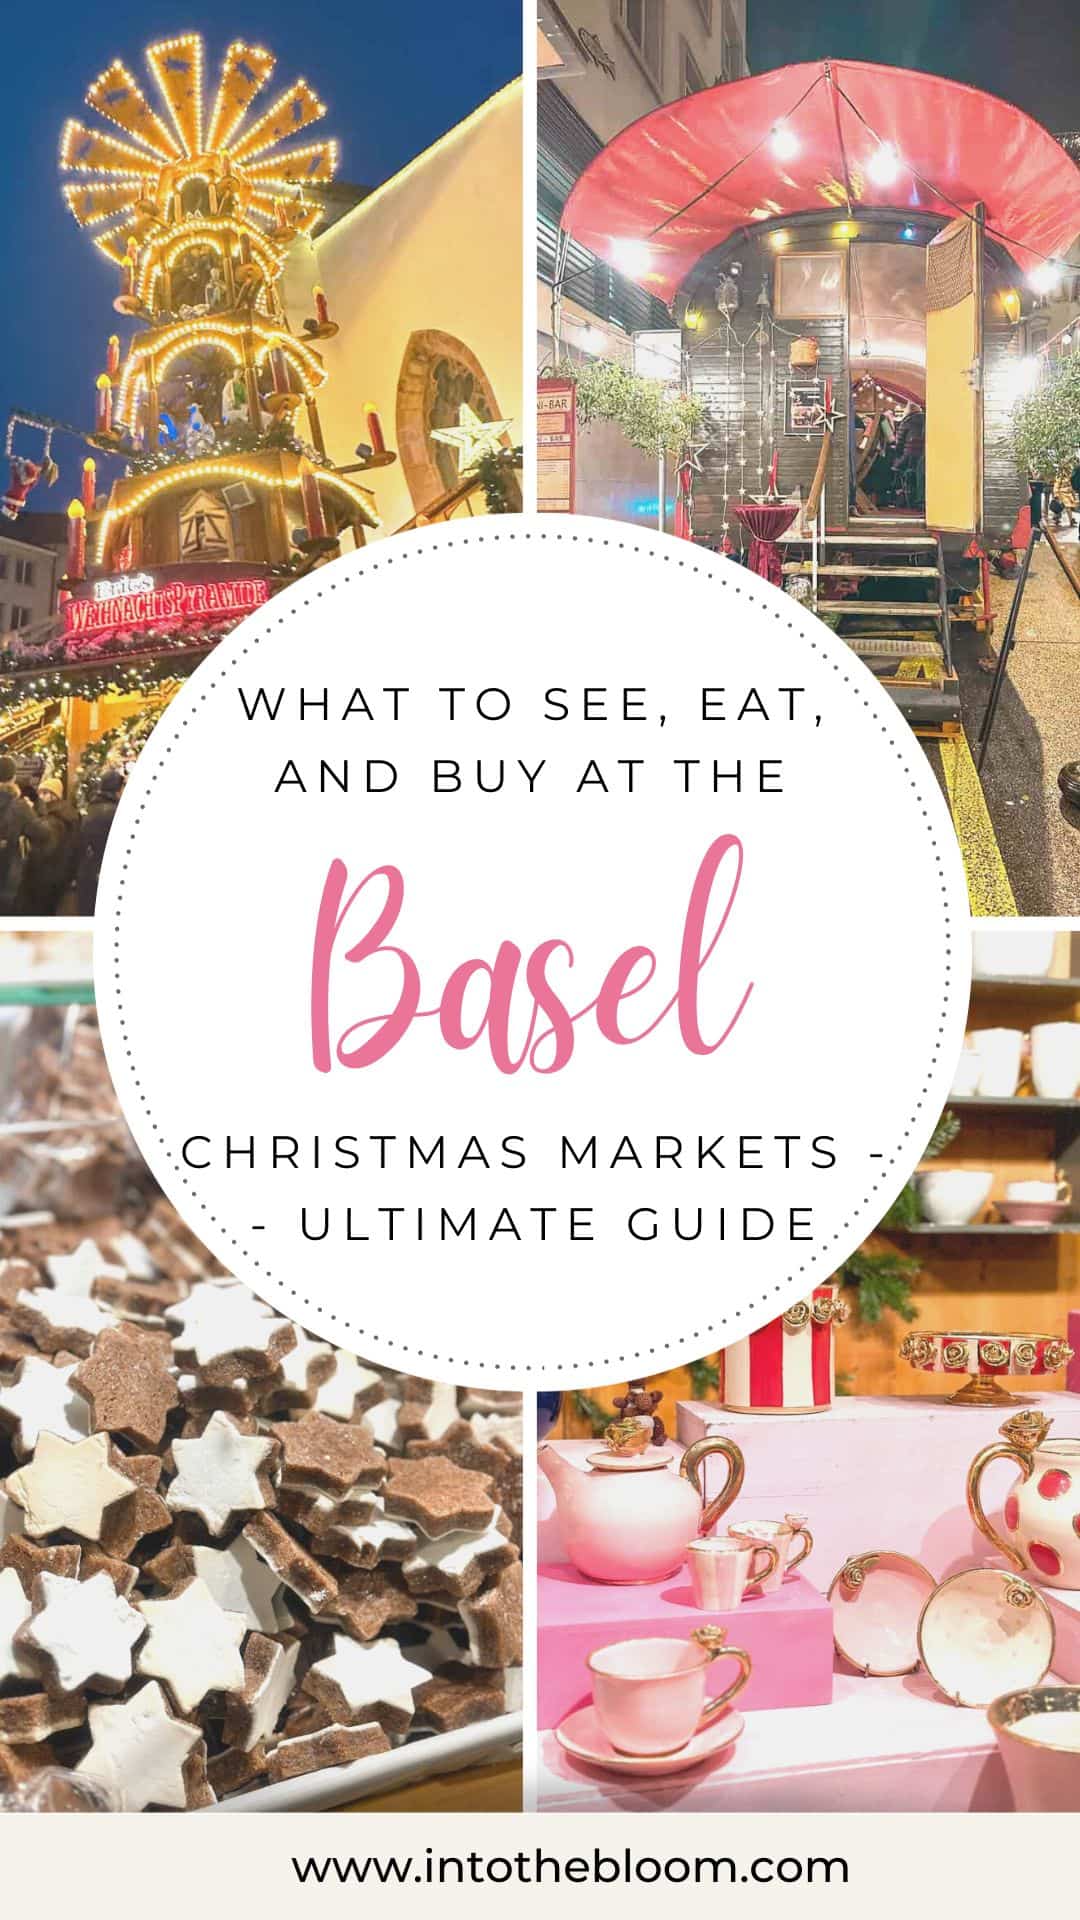 What to see, eat, and buy at the Basel Christmas Markets - The ultimate guide